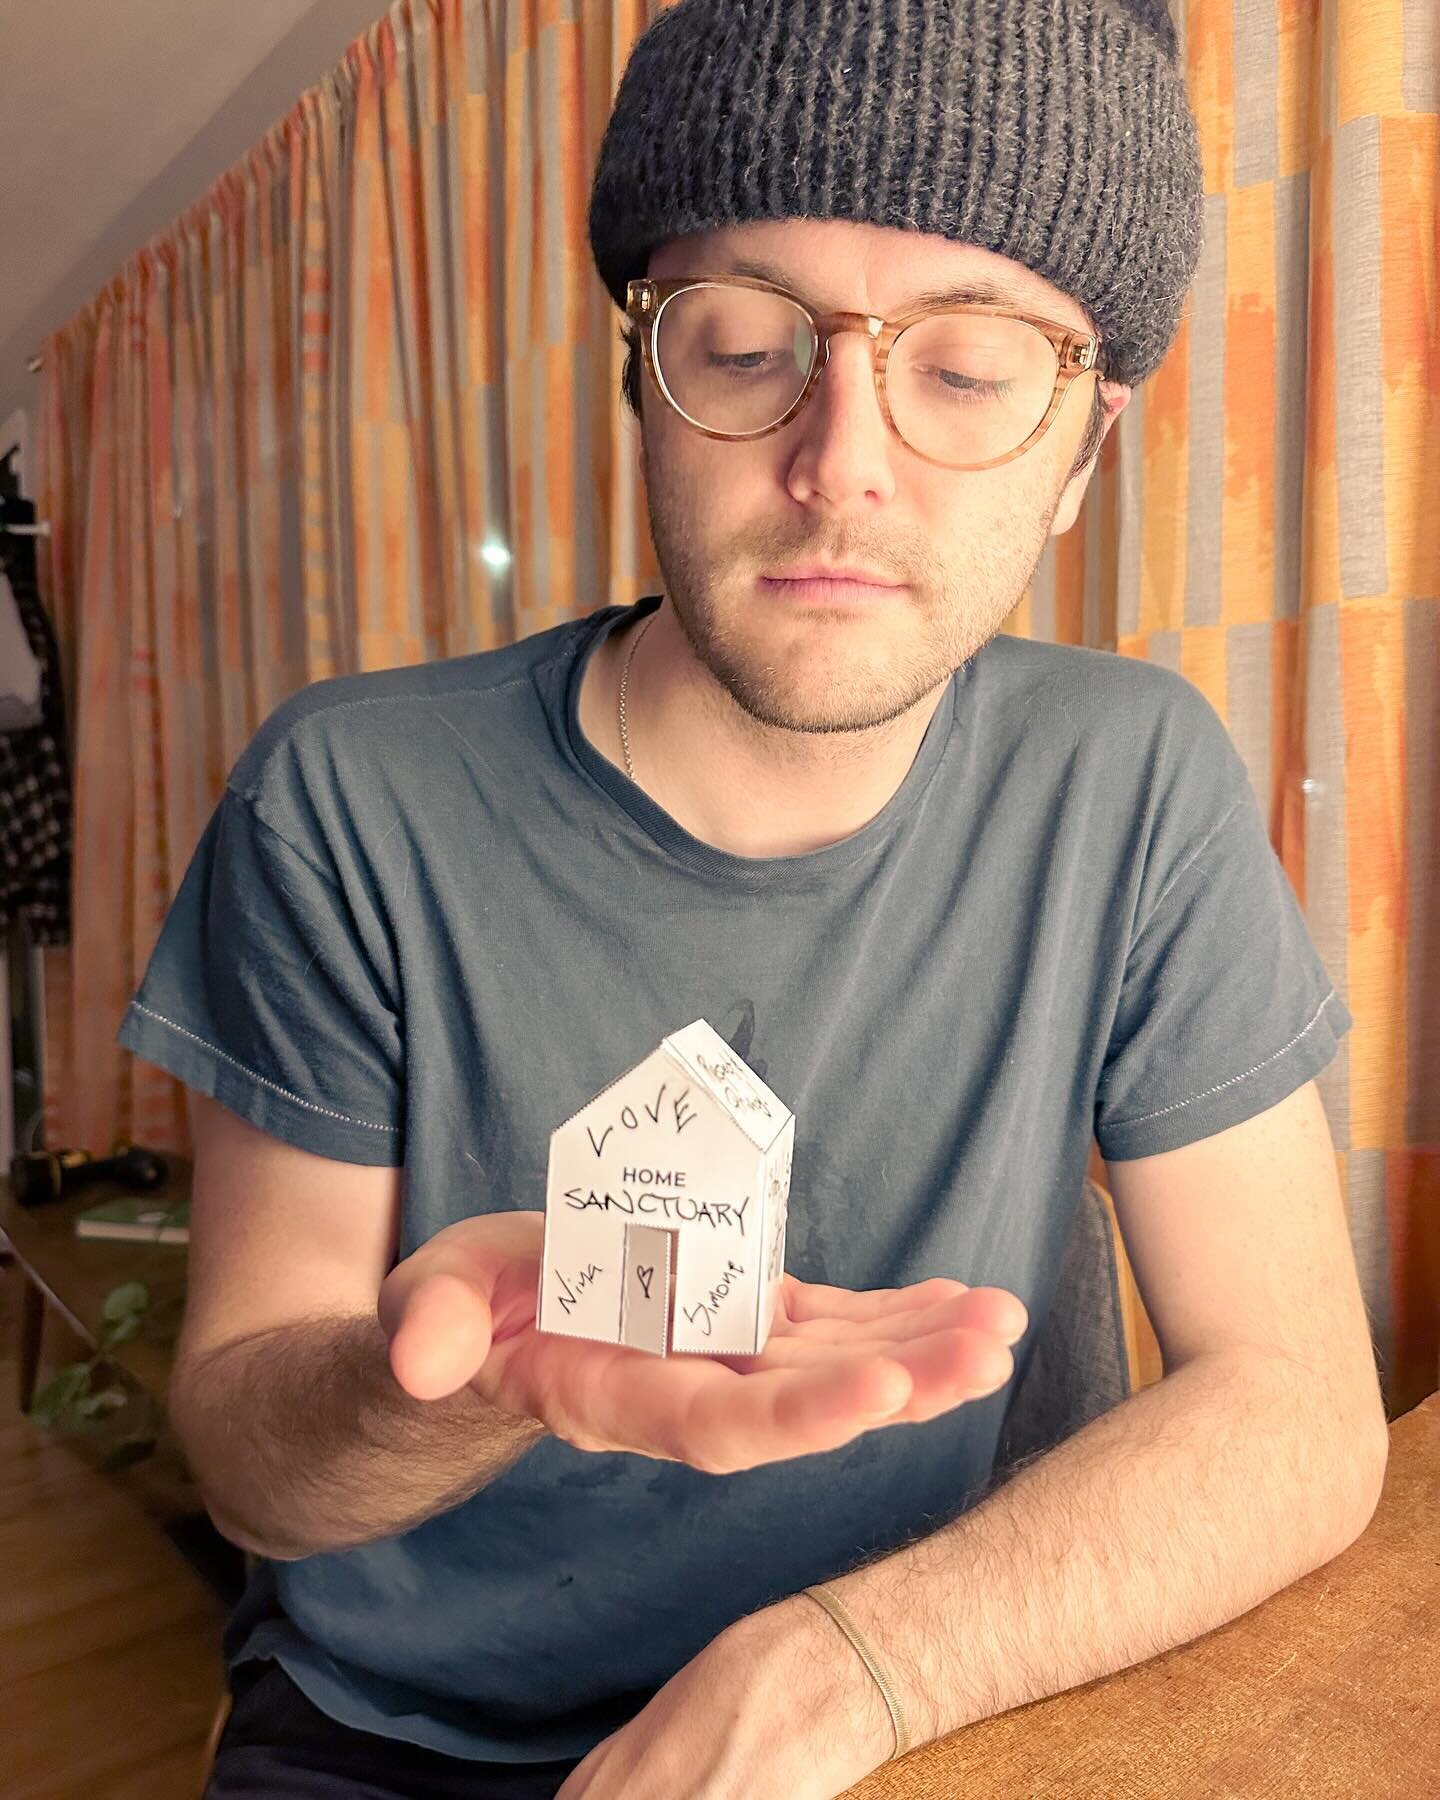 Loved seeing your creativity with our tiny Weld houses! Each one symbolizes the safe, supportive spaces we've provided for over 100K nights. 🌟
These tiny homes represent more than shelter&mdash;they're about connection, recovery, and new beginnings.